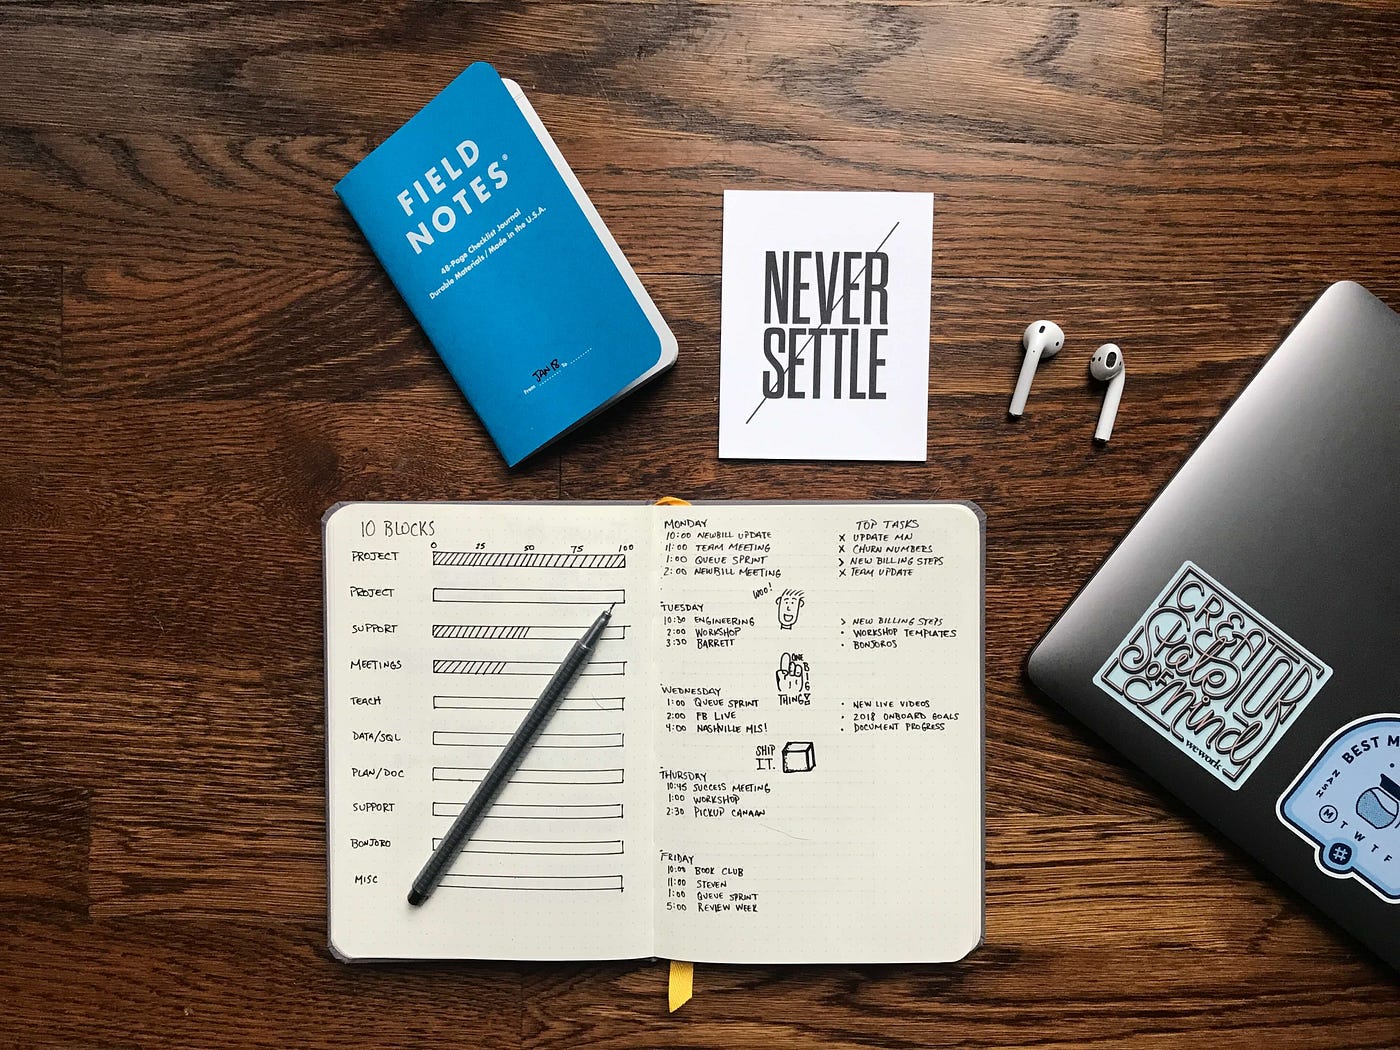 A Few Thoughts On Getting Started With A Bullet Journal